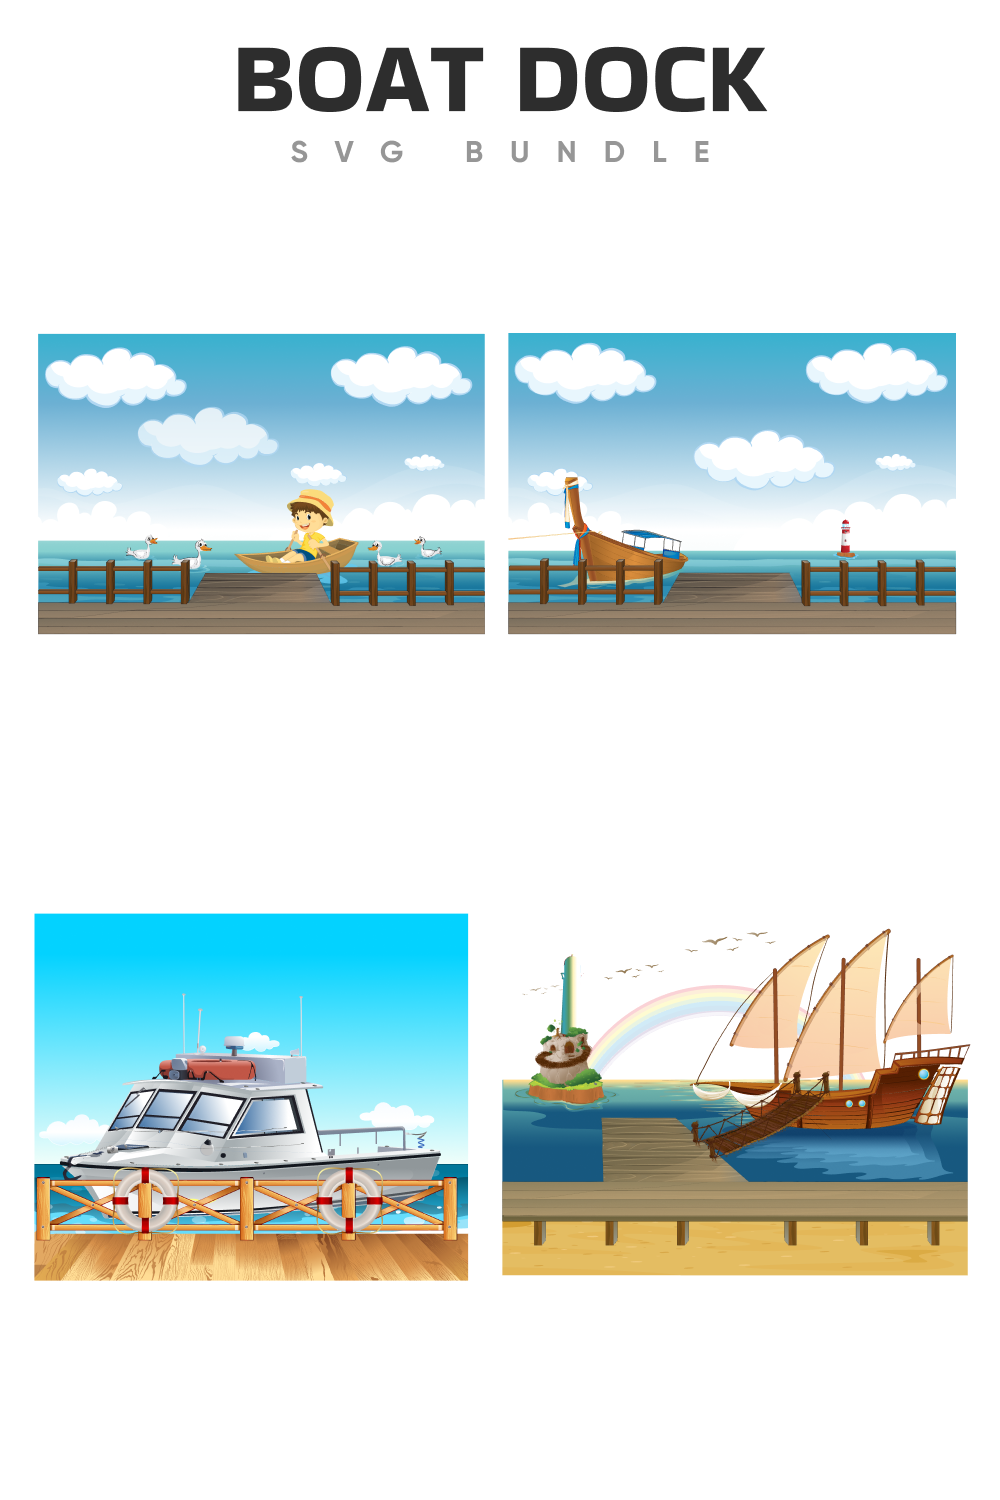 Four bright options of the boat docks.